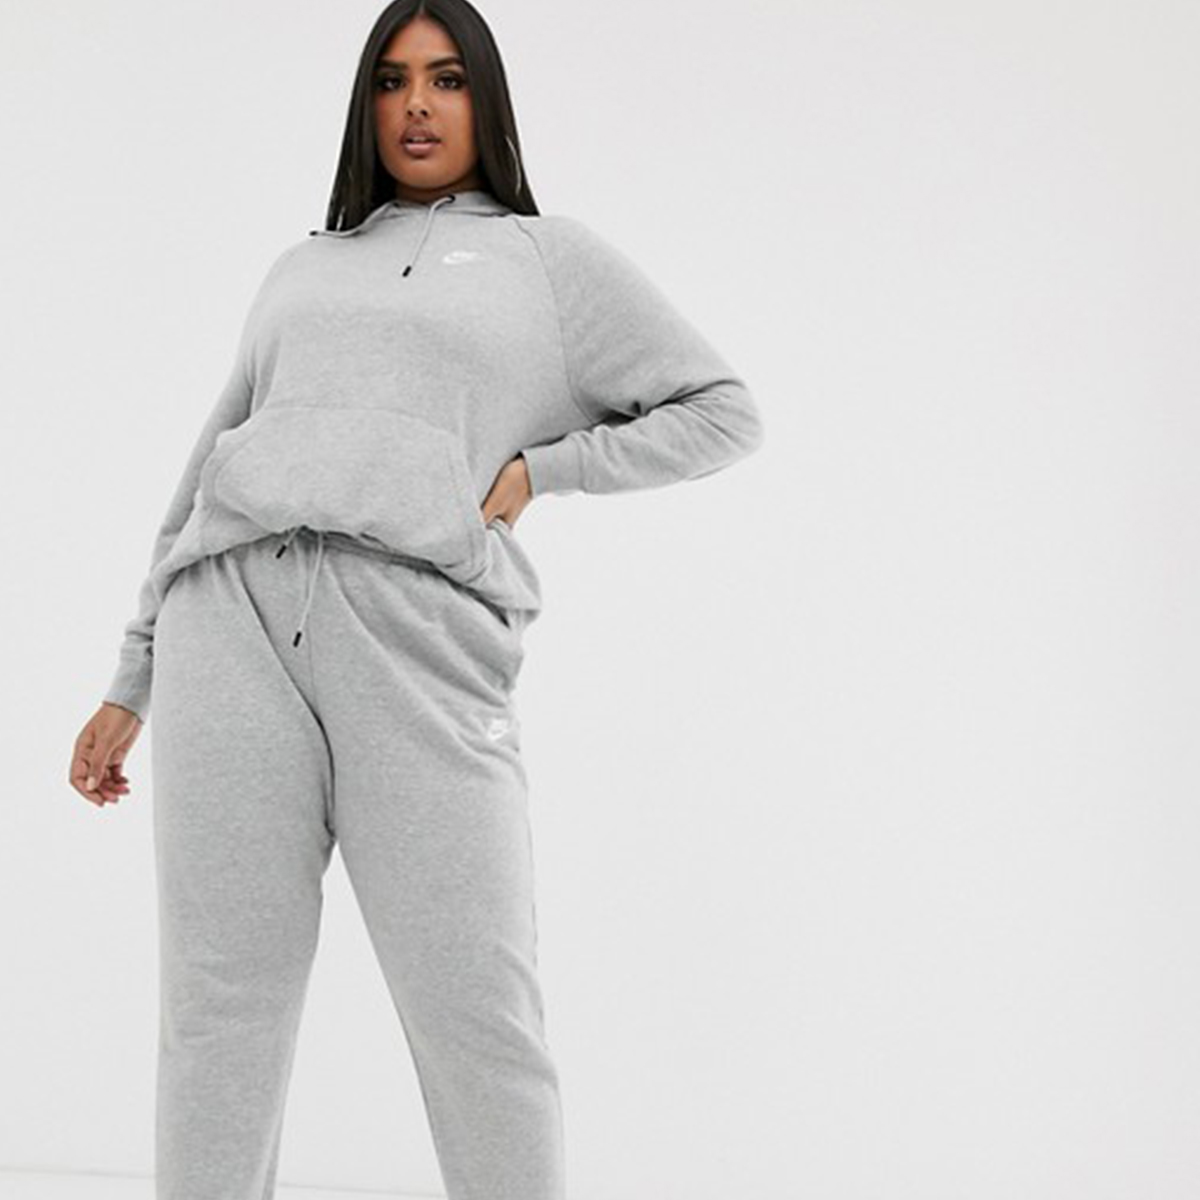 outfits with grey nike sweatpants